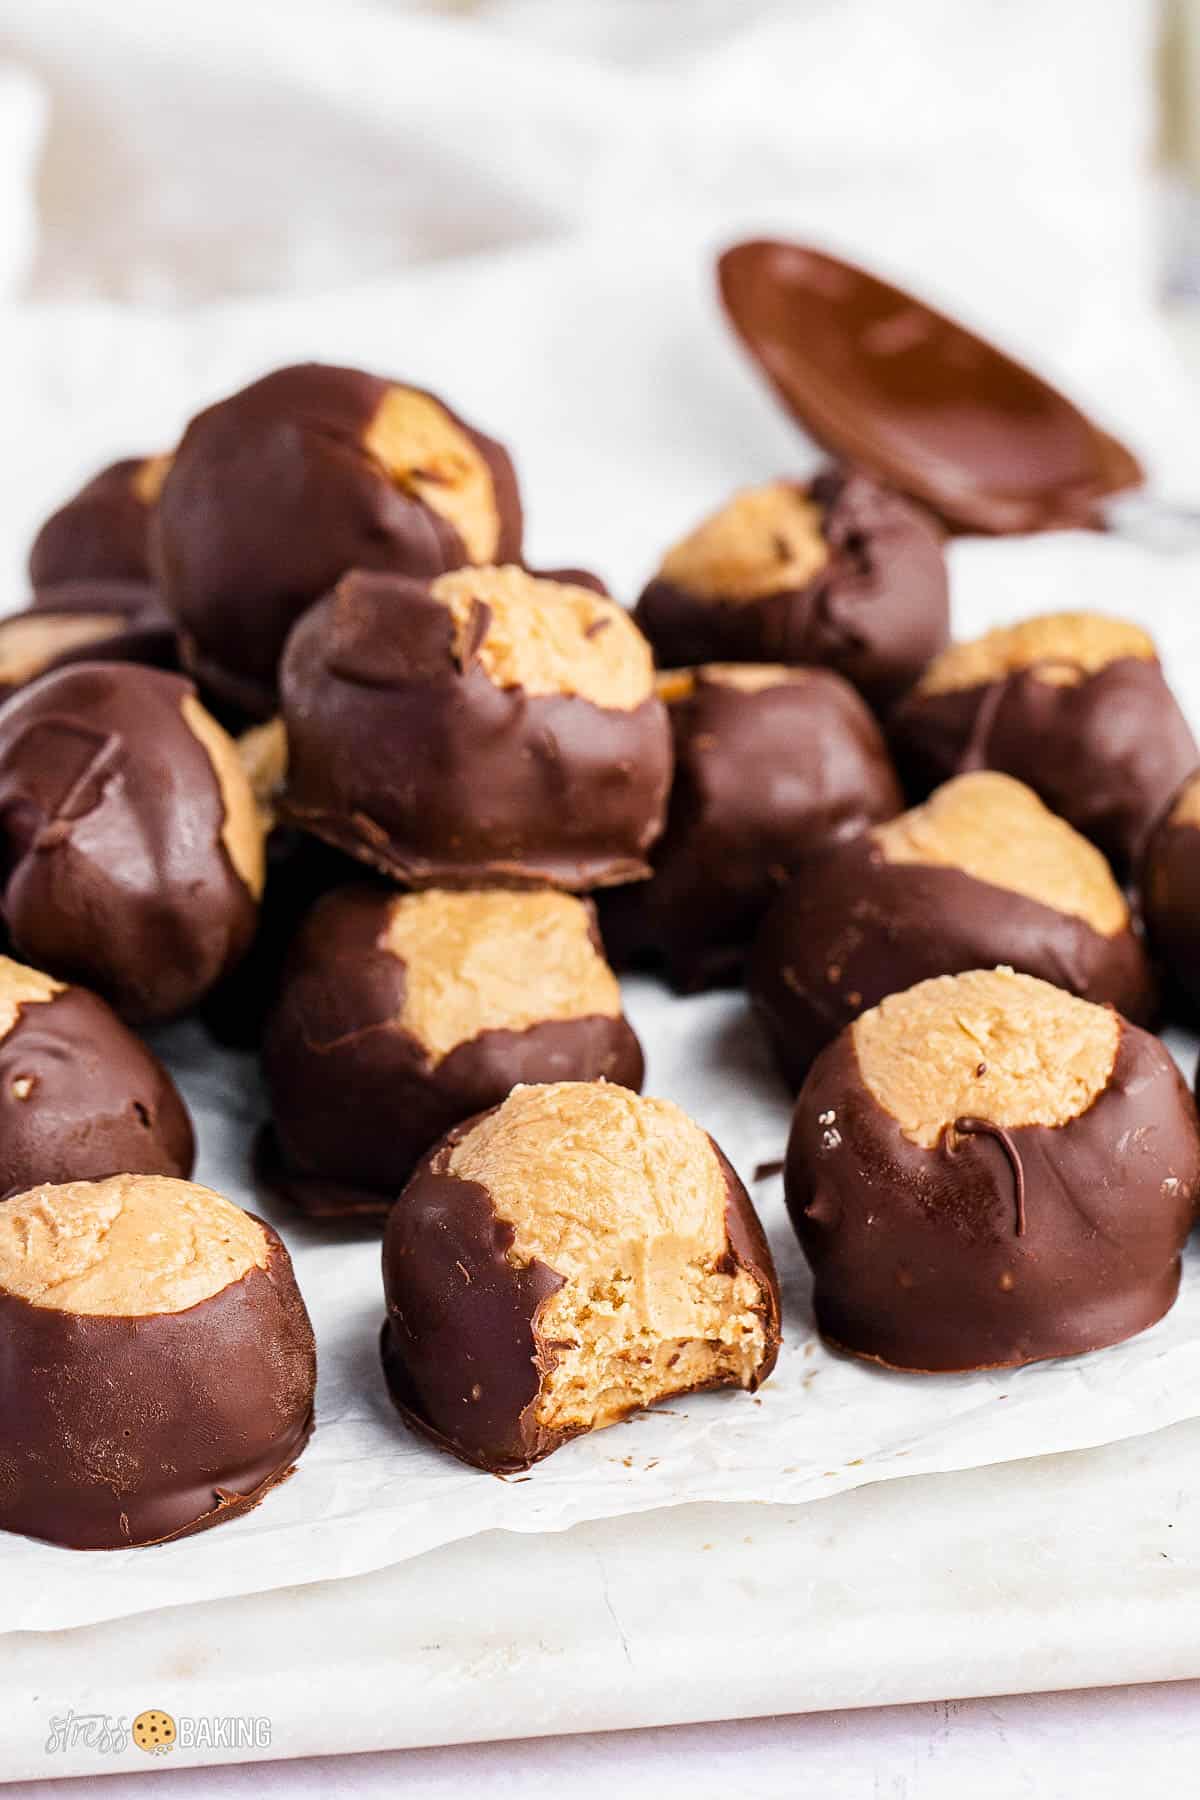 A pile of buckeye balls on parchment paper with a bite taken out of one